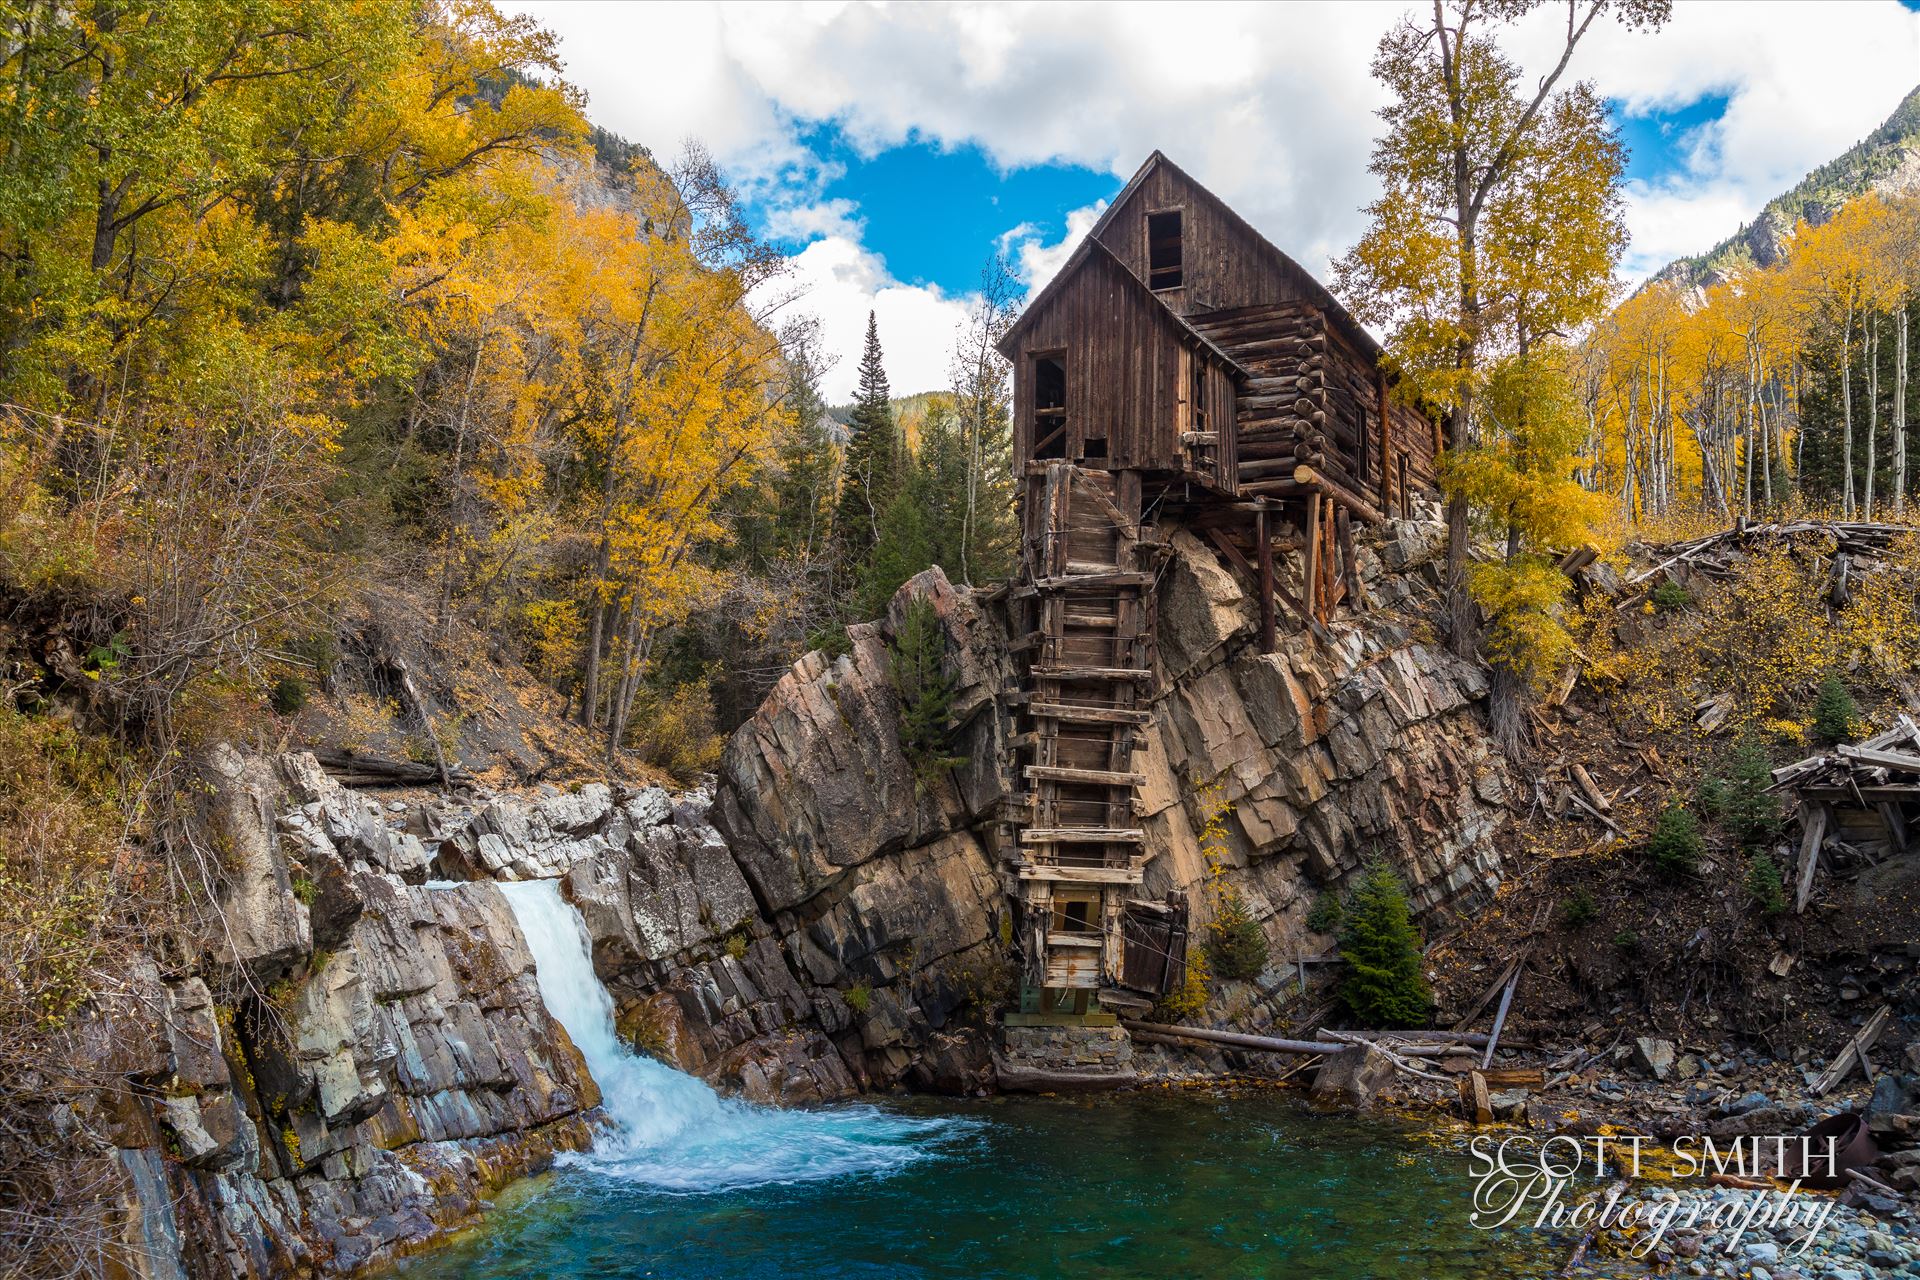 Crystal Mill, Colorado 03 The Crystal Mill, or the Old Mill is an 1892 wooden powerhouse located on an outcrop above the Crystal River in Crystal, Colorado by Scott Smith Photos